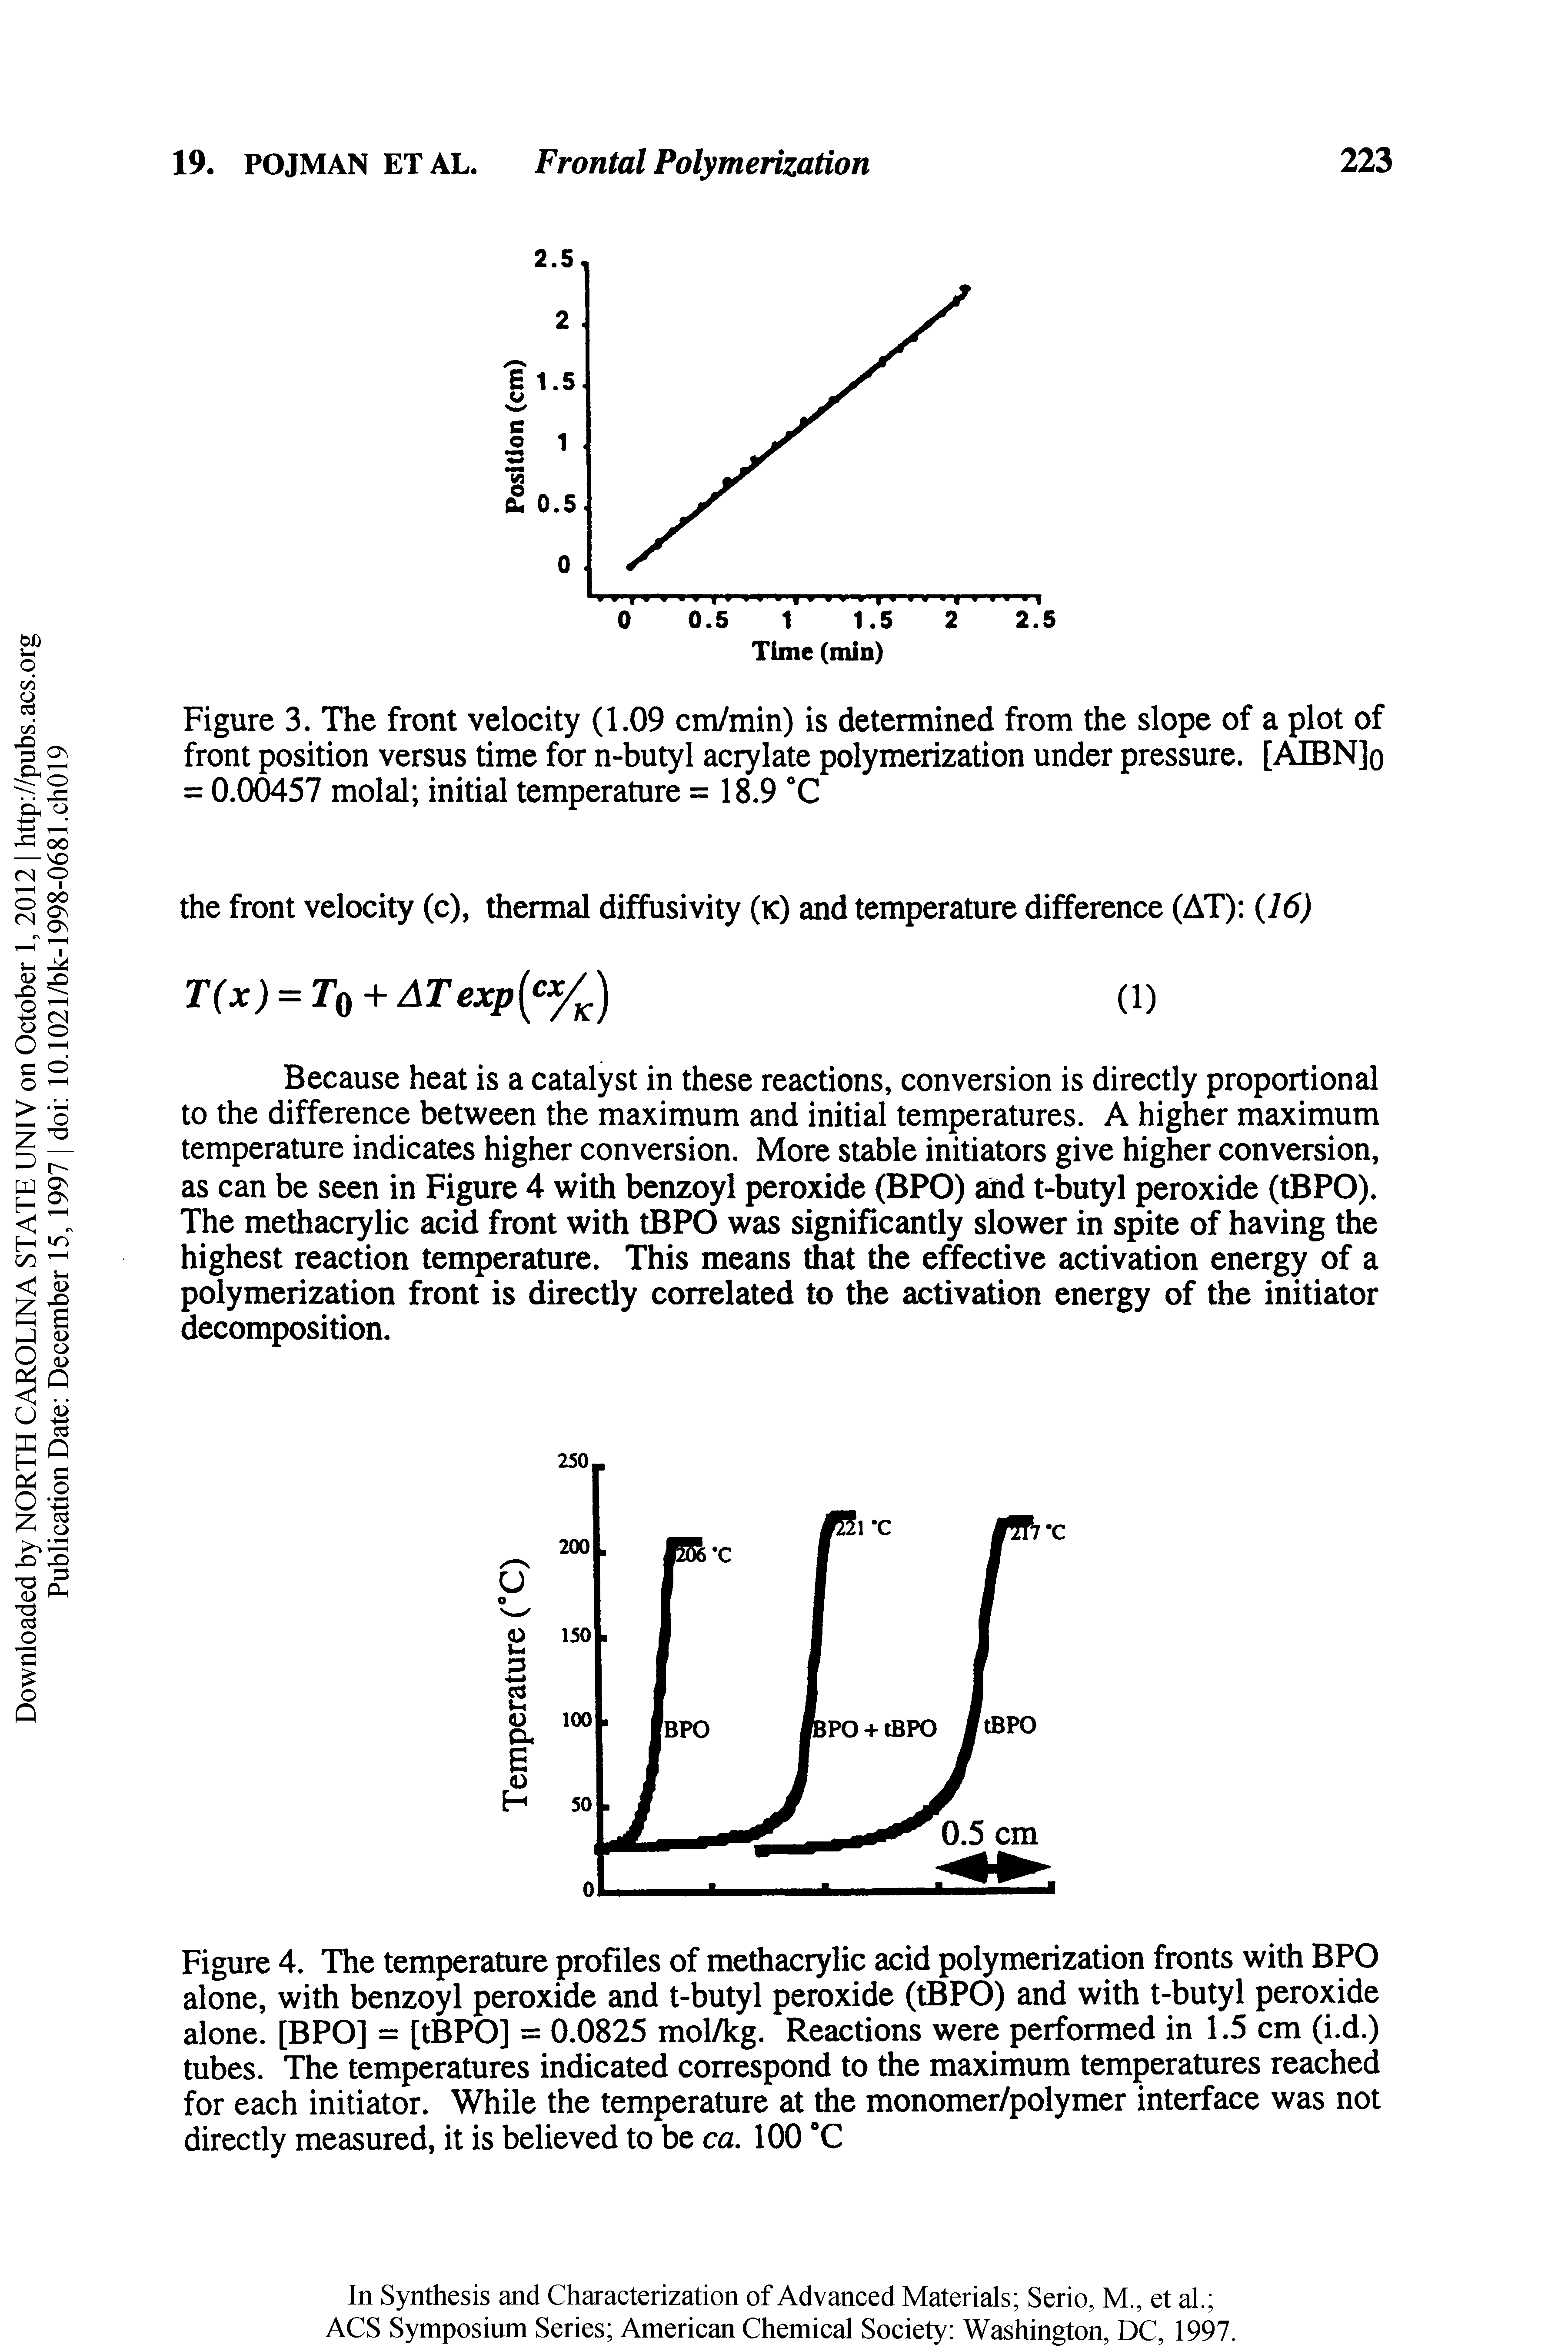 Figure 3. The front velocity (1.09 cm/min) is determined from the slope of a plot of front position versus time for n-butyl acrylate polymerization under pressure. [AIBN]o = 0.00457 molal initial temperature = 18.9 "C...